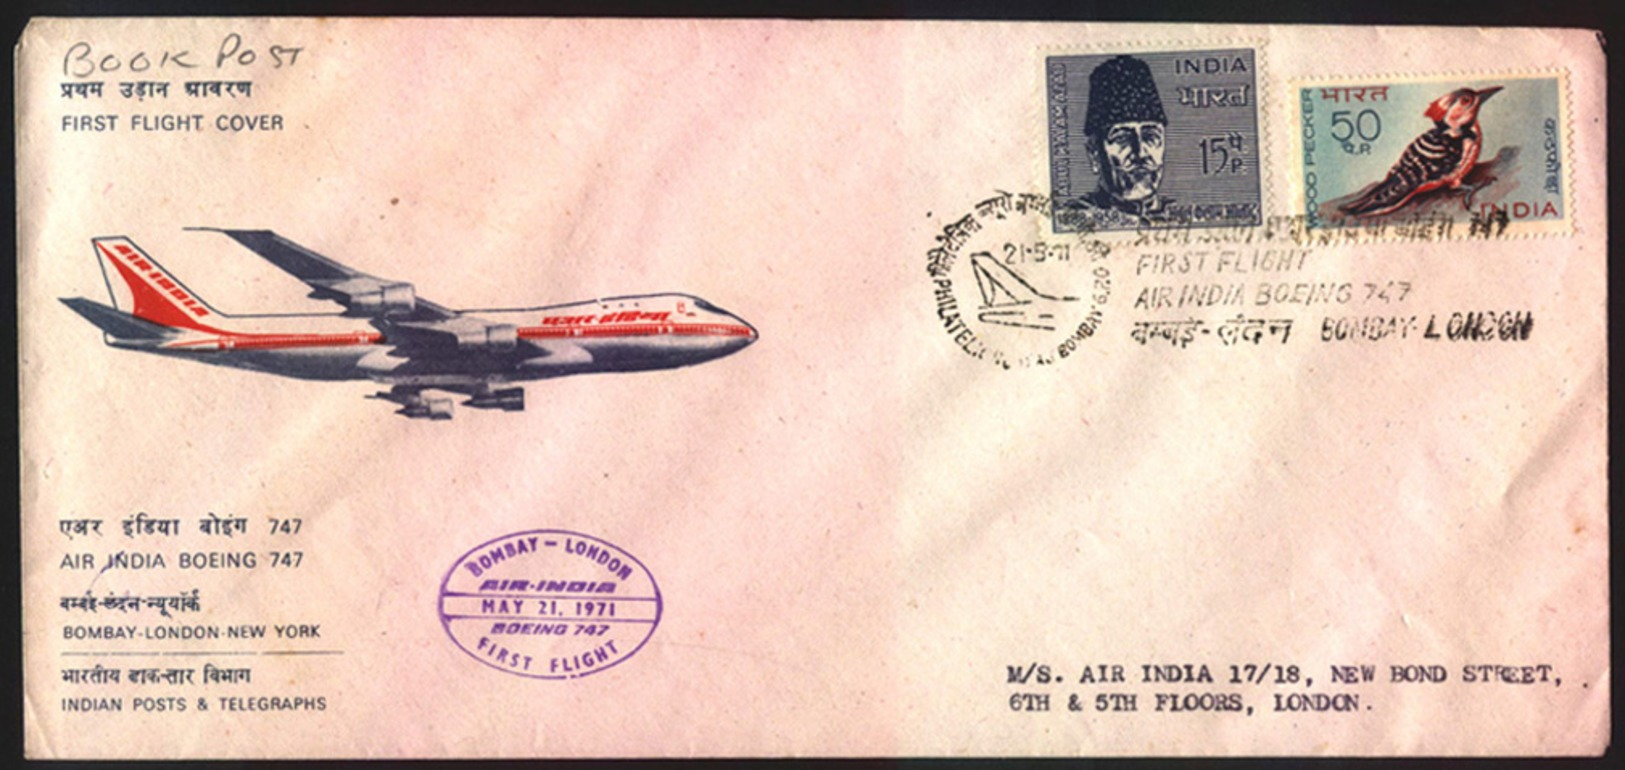 INDIA STAMPS, FIRST FLIGHT COVER, 21 MAY 1971 - Luchtpost